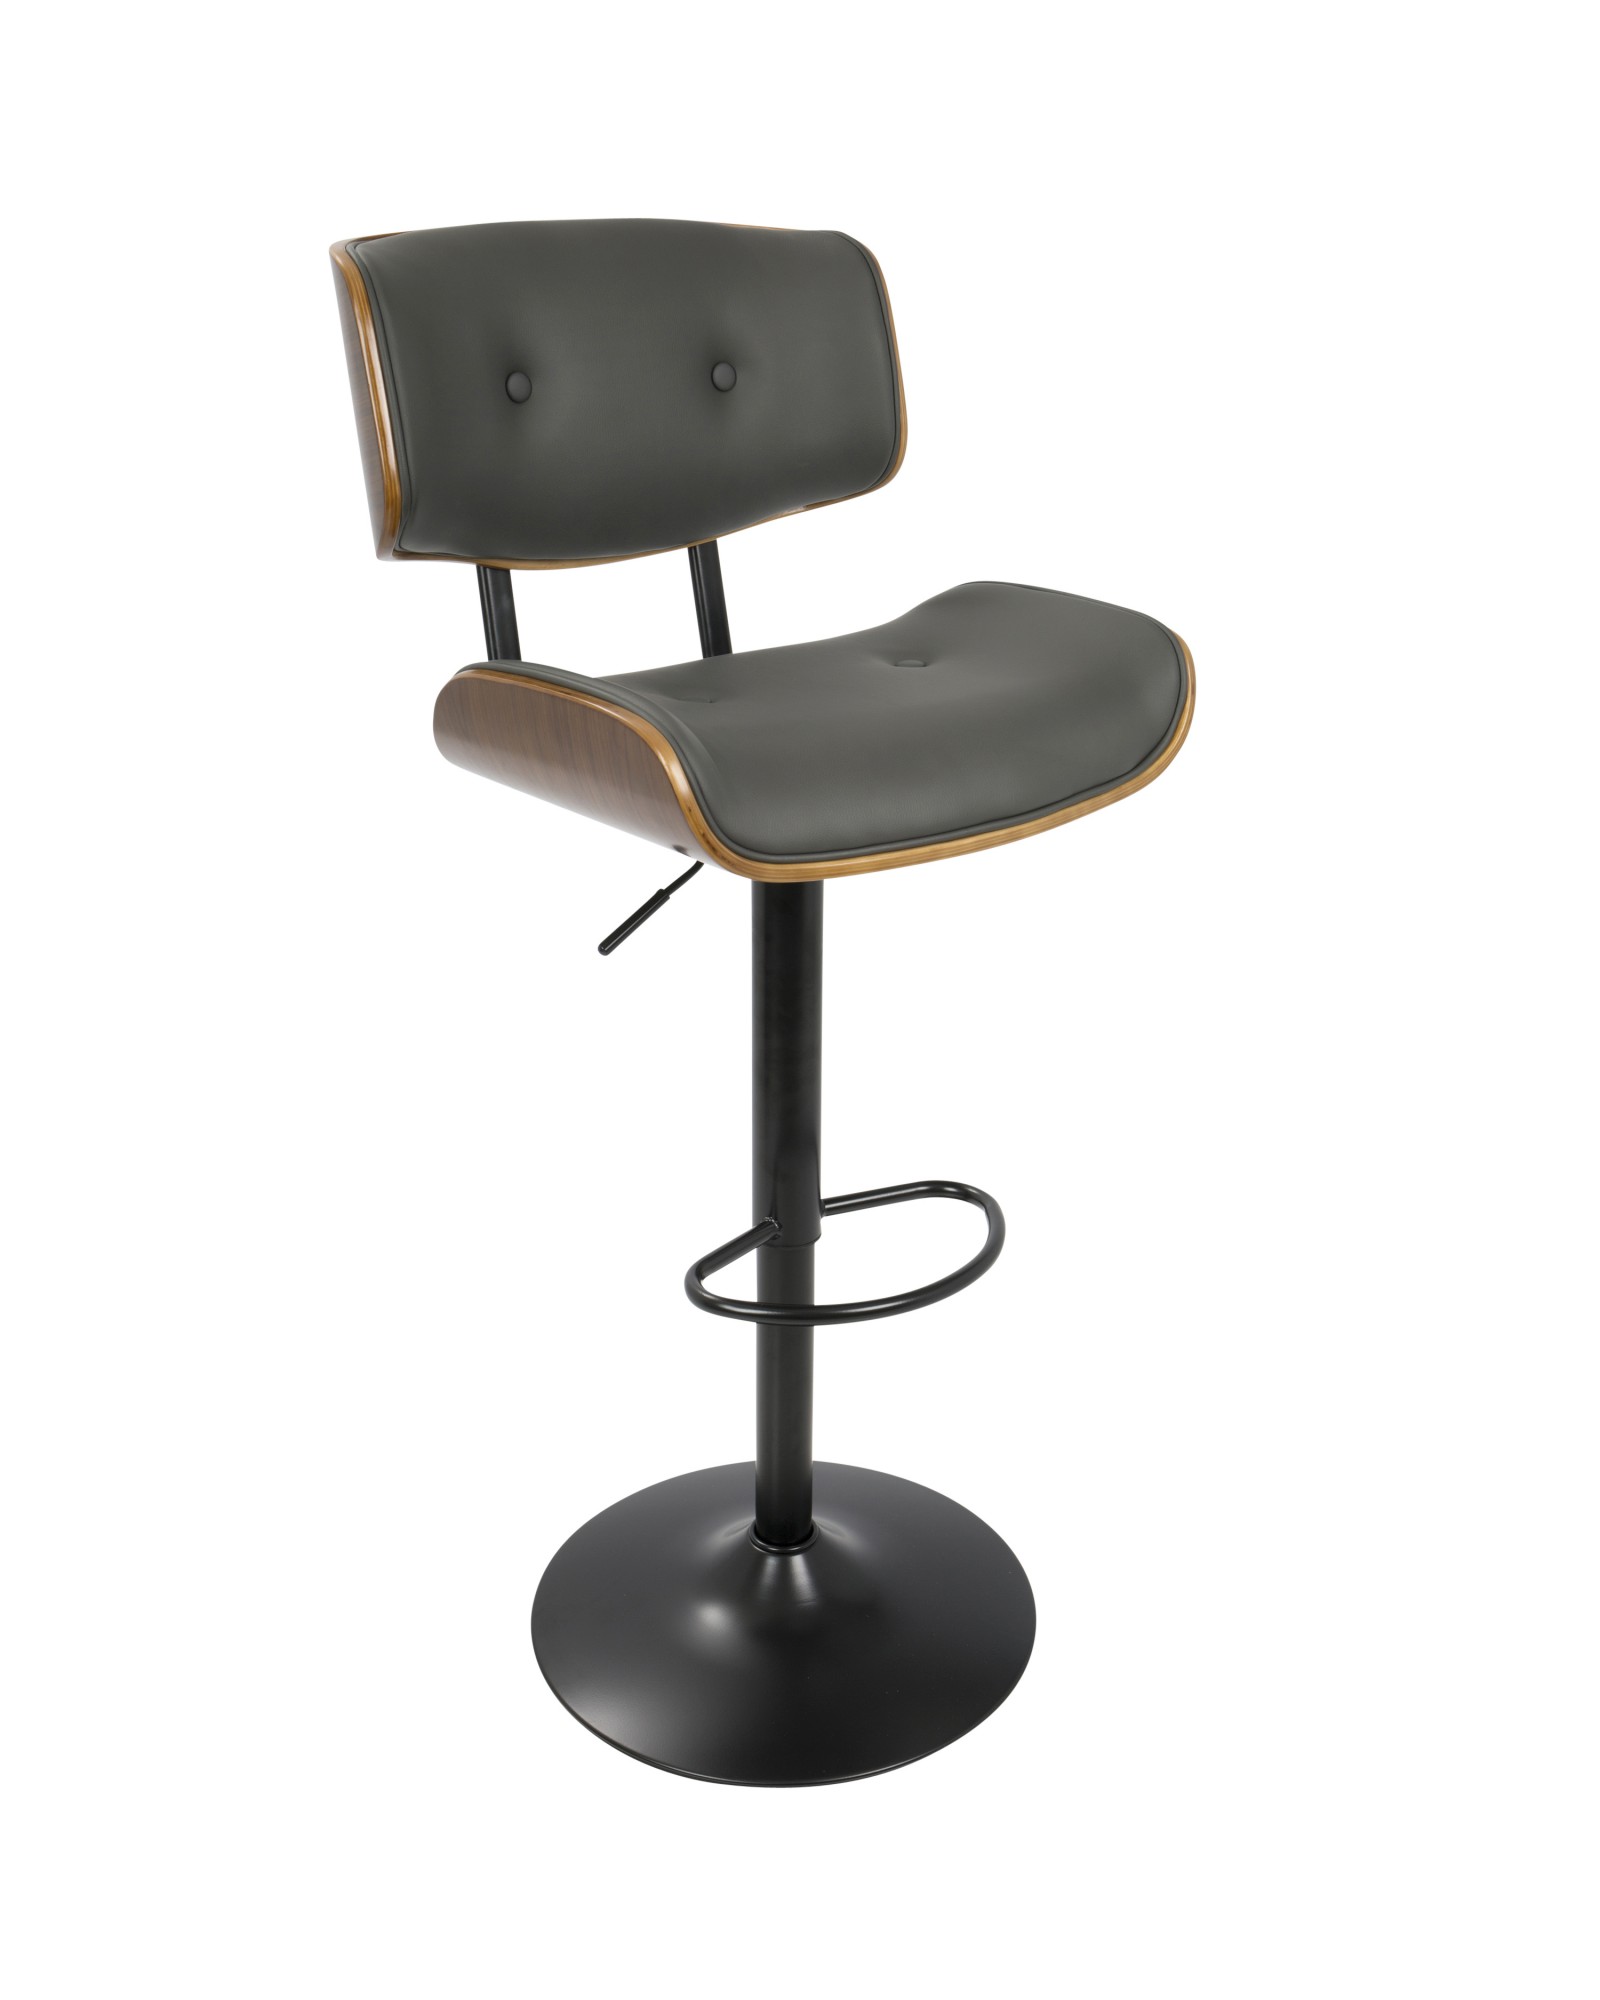 Lombardi Mid-Century Modern Adjustable Barstool in Walnut with Grey Faux Leather